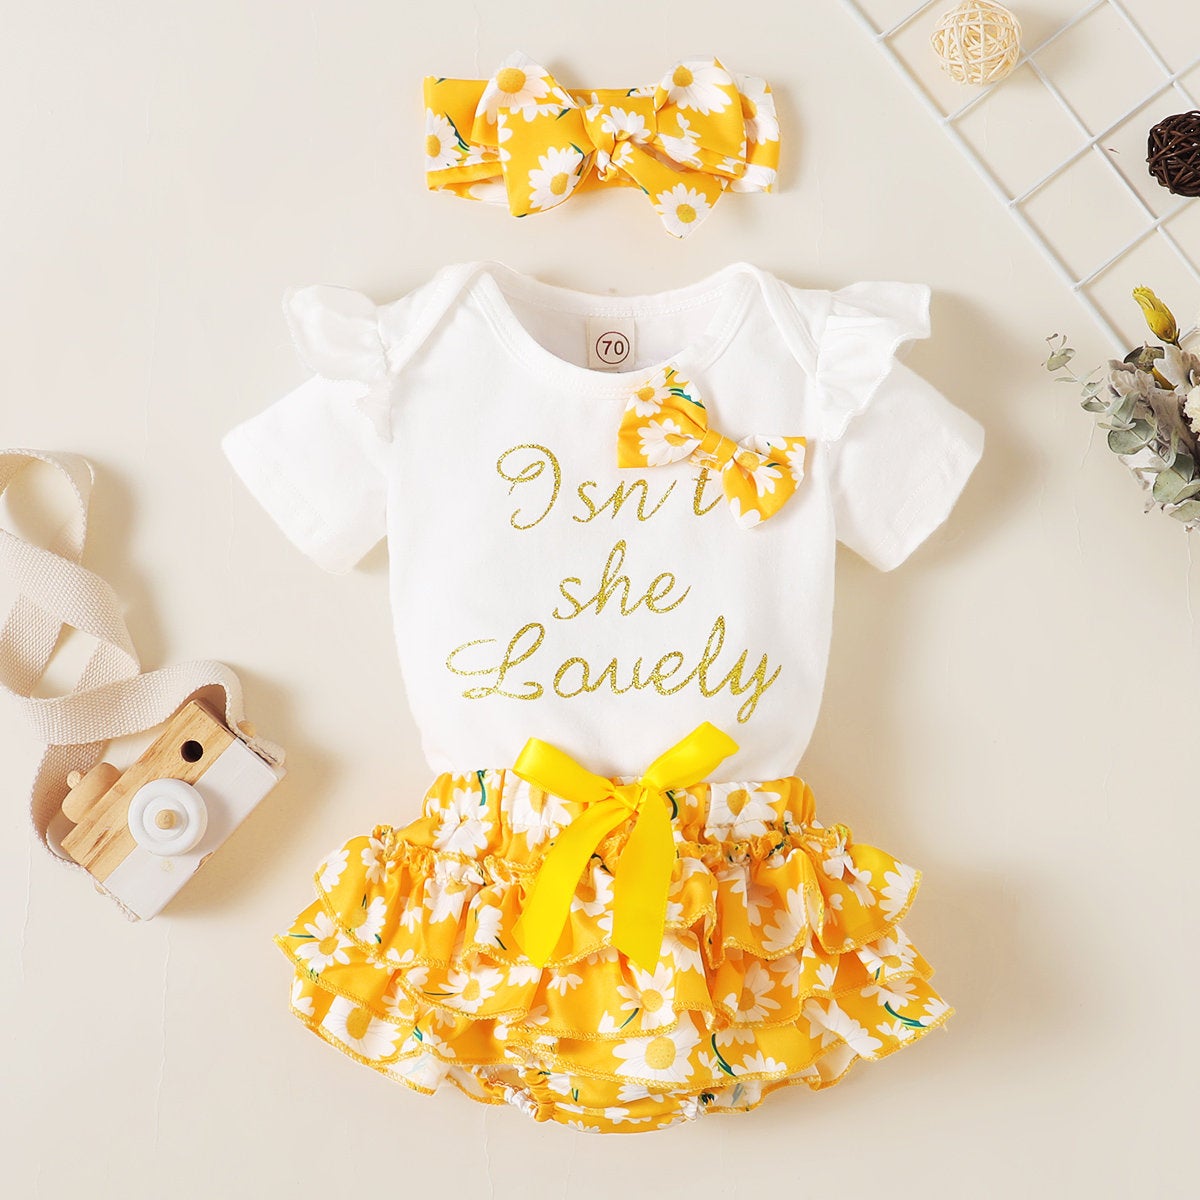 Isn't She Lovely Baby Girl Clothes Set